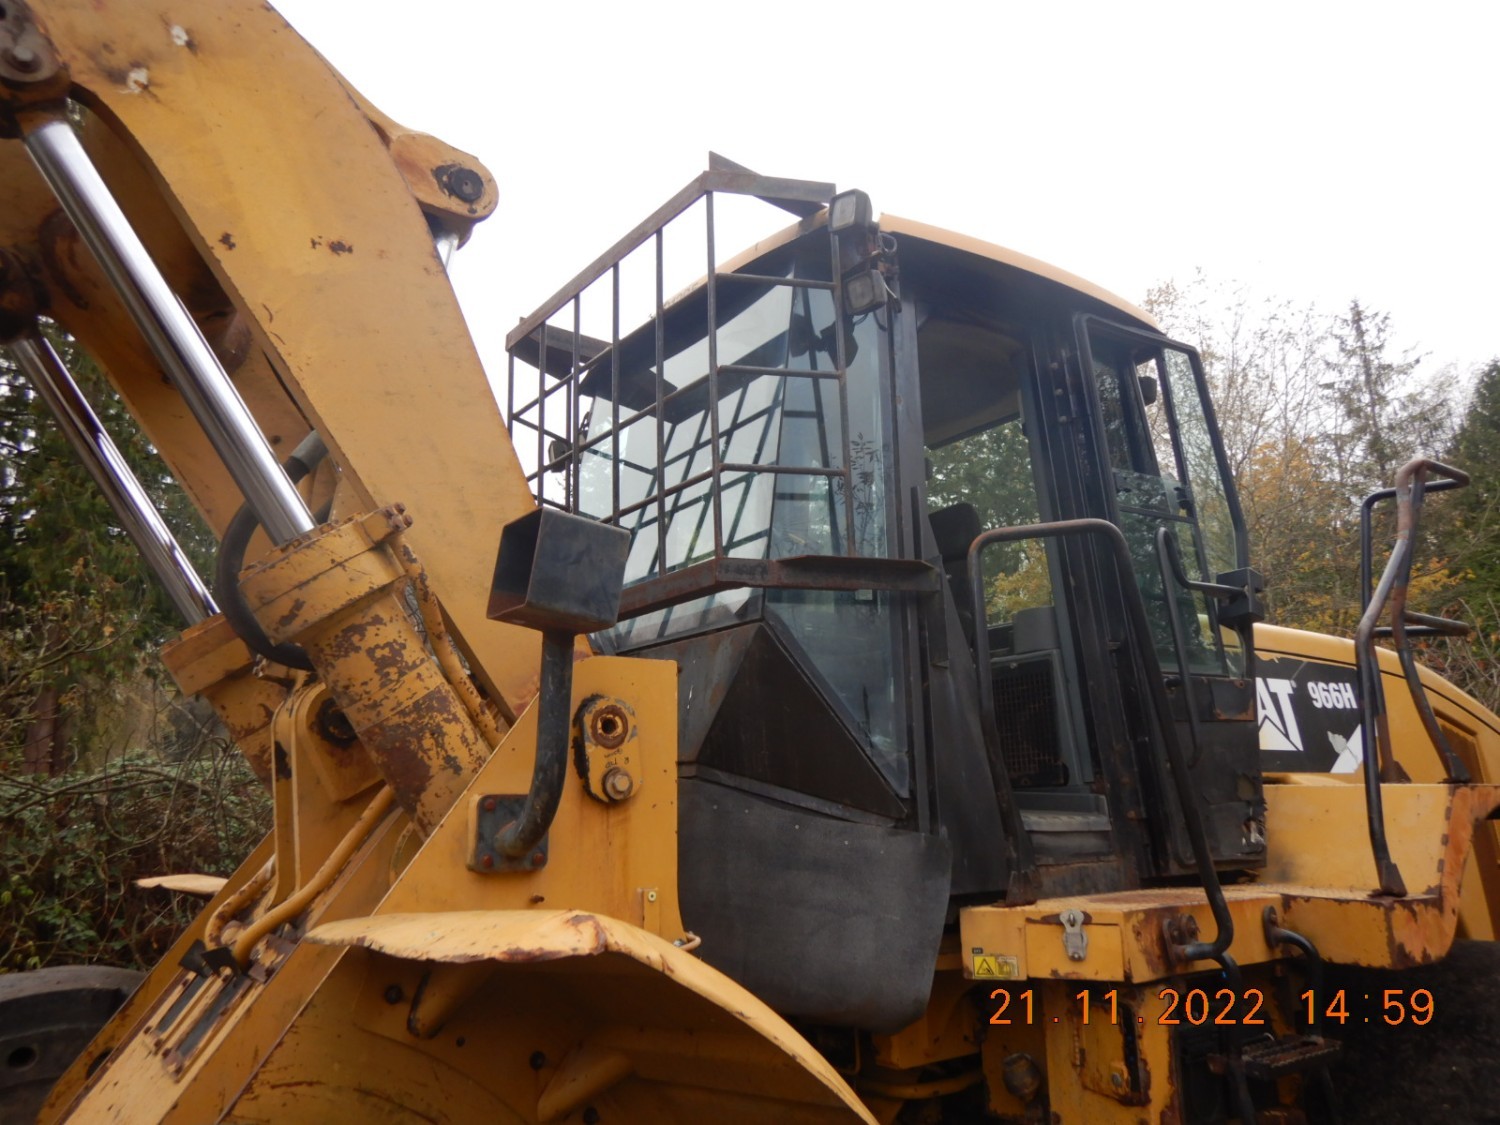 sold-2010-cat-966h-cw-custom-daequip-dual-log-or-pipe-grapple-with-internal-grapple-to-keep-pipe-logs-poles-secure-big-8